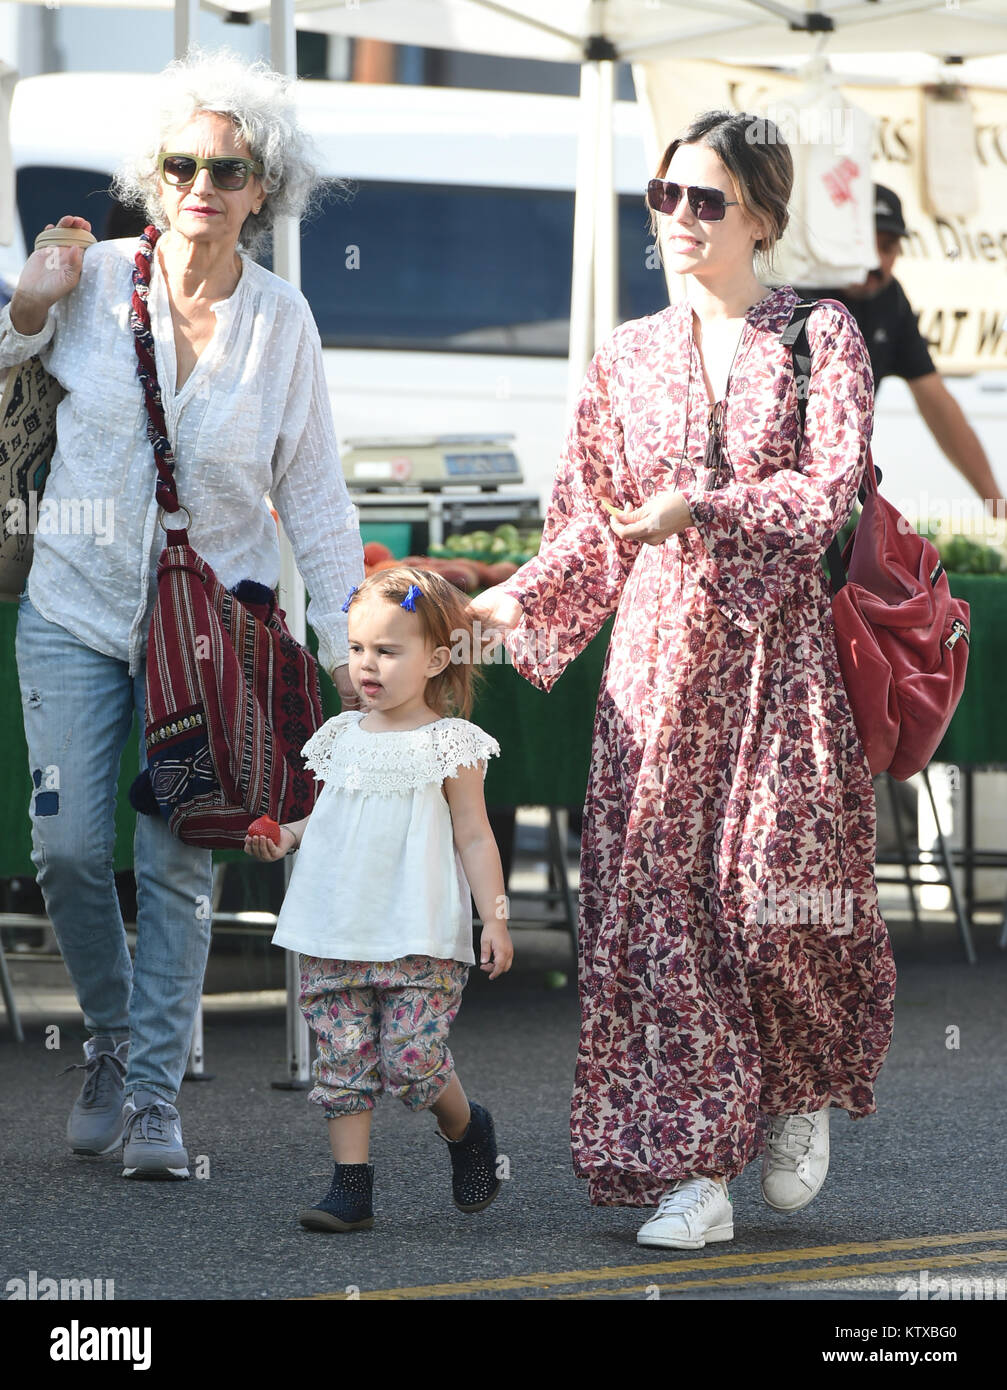 Rachel Bilson takes her daughter Briar Rose Christensen to the Farmers  Market with her mother Janice Stanger Featuring: Rachel Bilson, Briar Rose  Christensen, Janice Stanger Where: Los Angeles, California, United States  When: